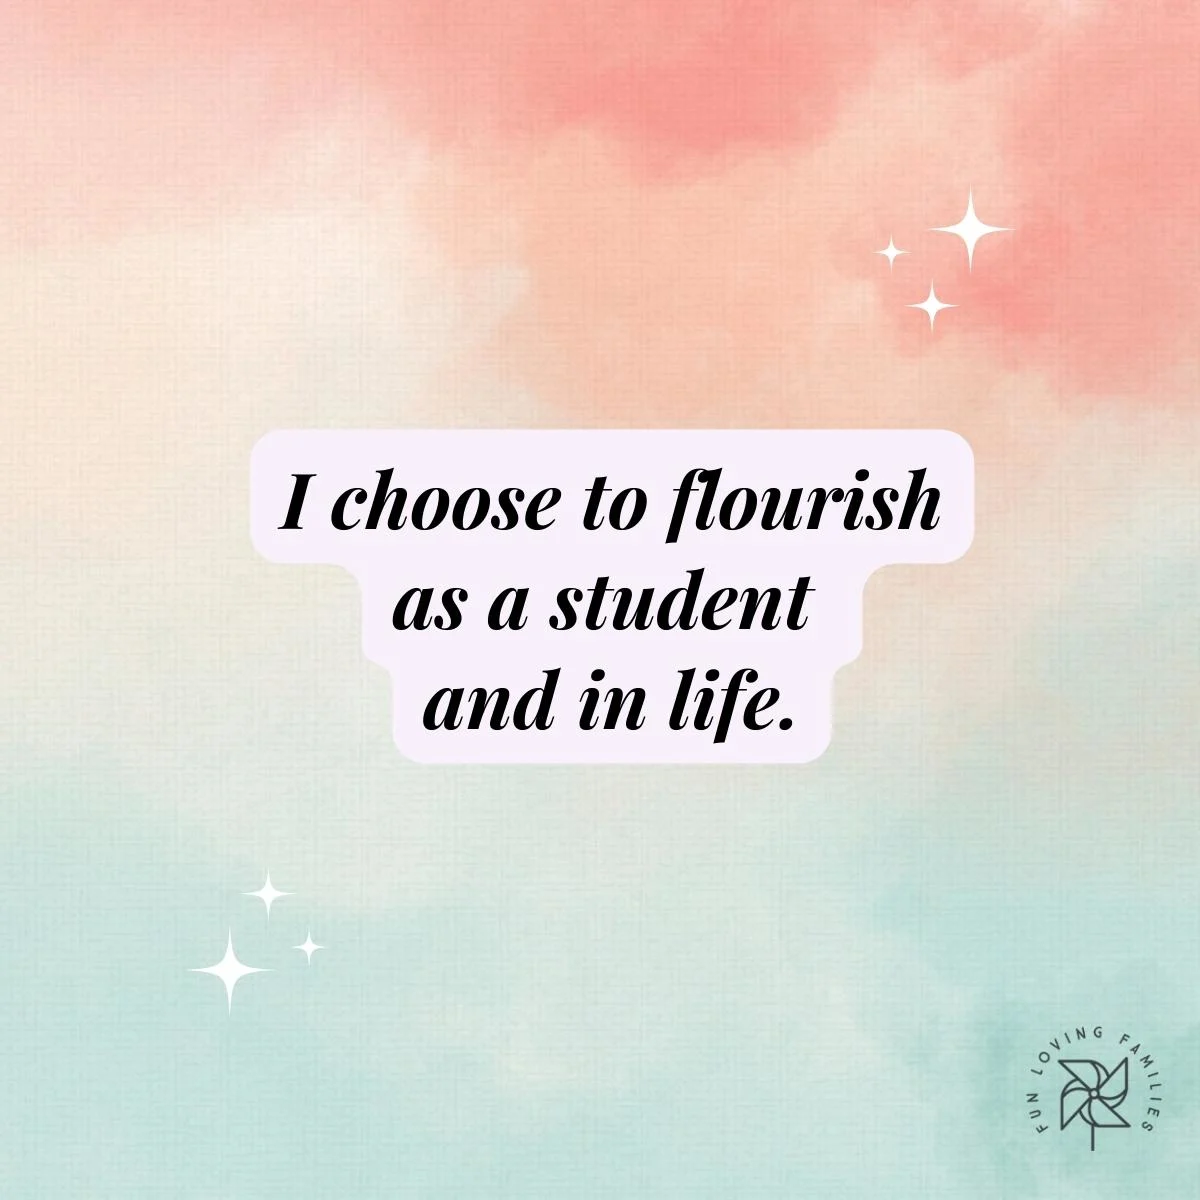 I choose to flourish as a student and in life affirmation